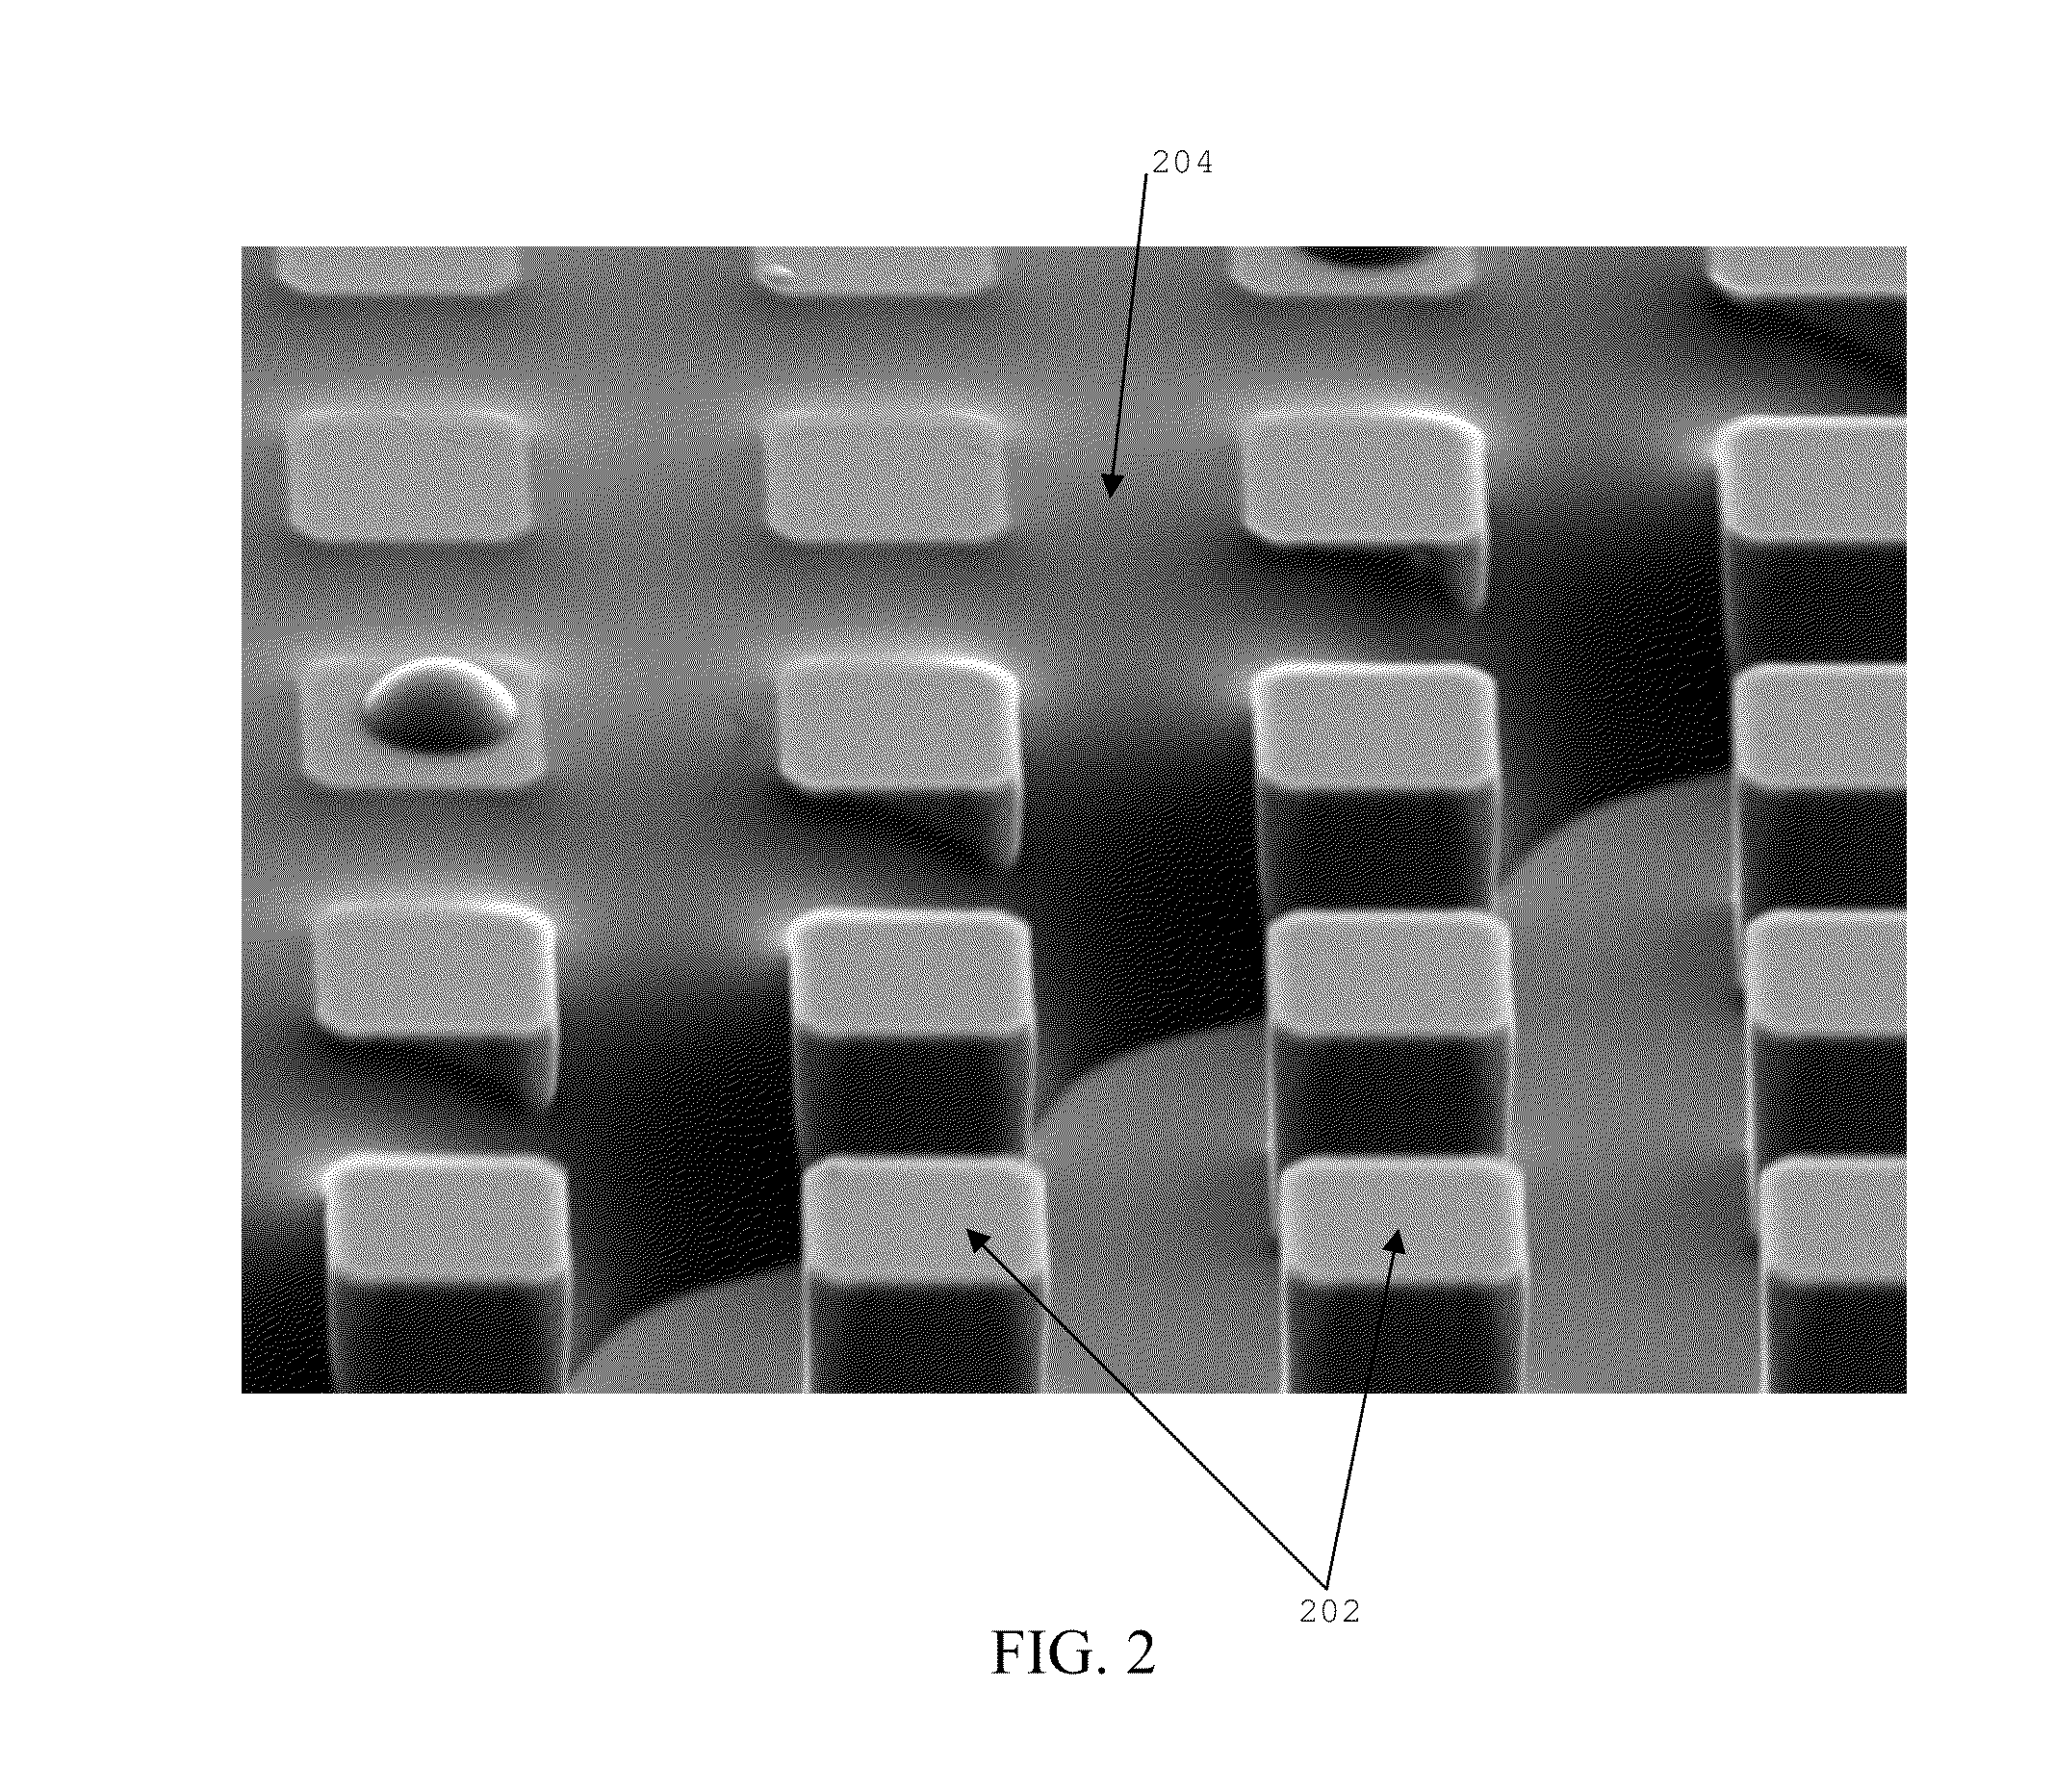 Articles and methods for modifying condensation on surfaces